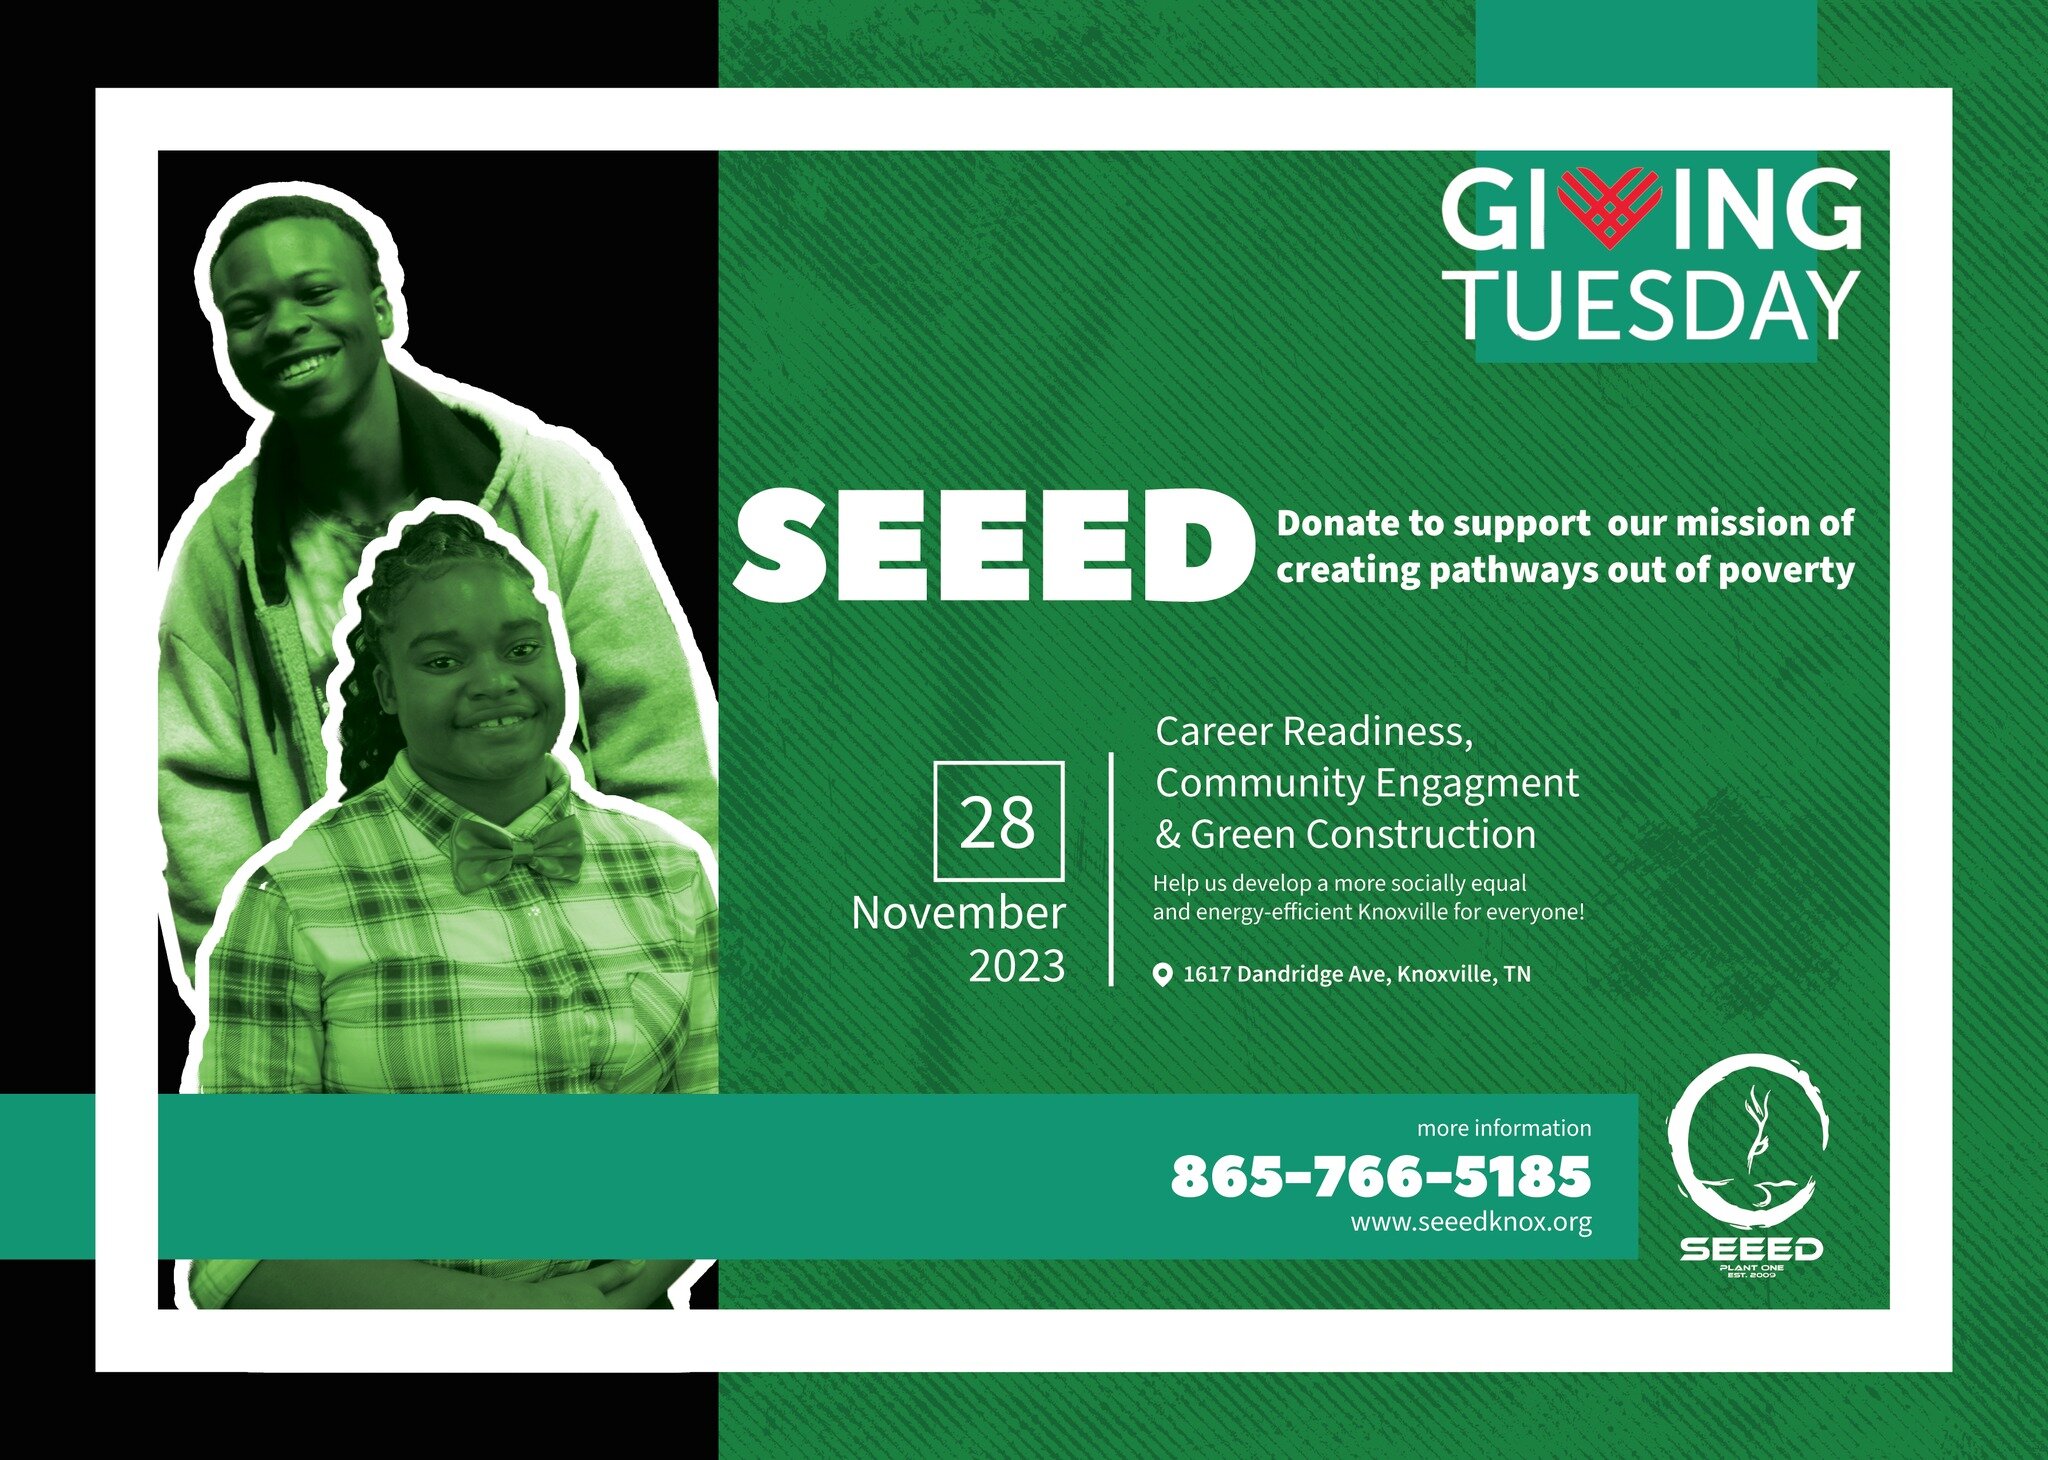 Today is THE BIG GIVE!

Join us in this incredible day of generosity, where every donation has the power to transform lives. Give big, give boldly, and make an impact that resonates far and wide. At SEEED, your support fuels our initiatives that shap